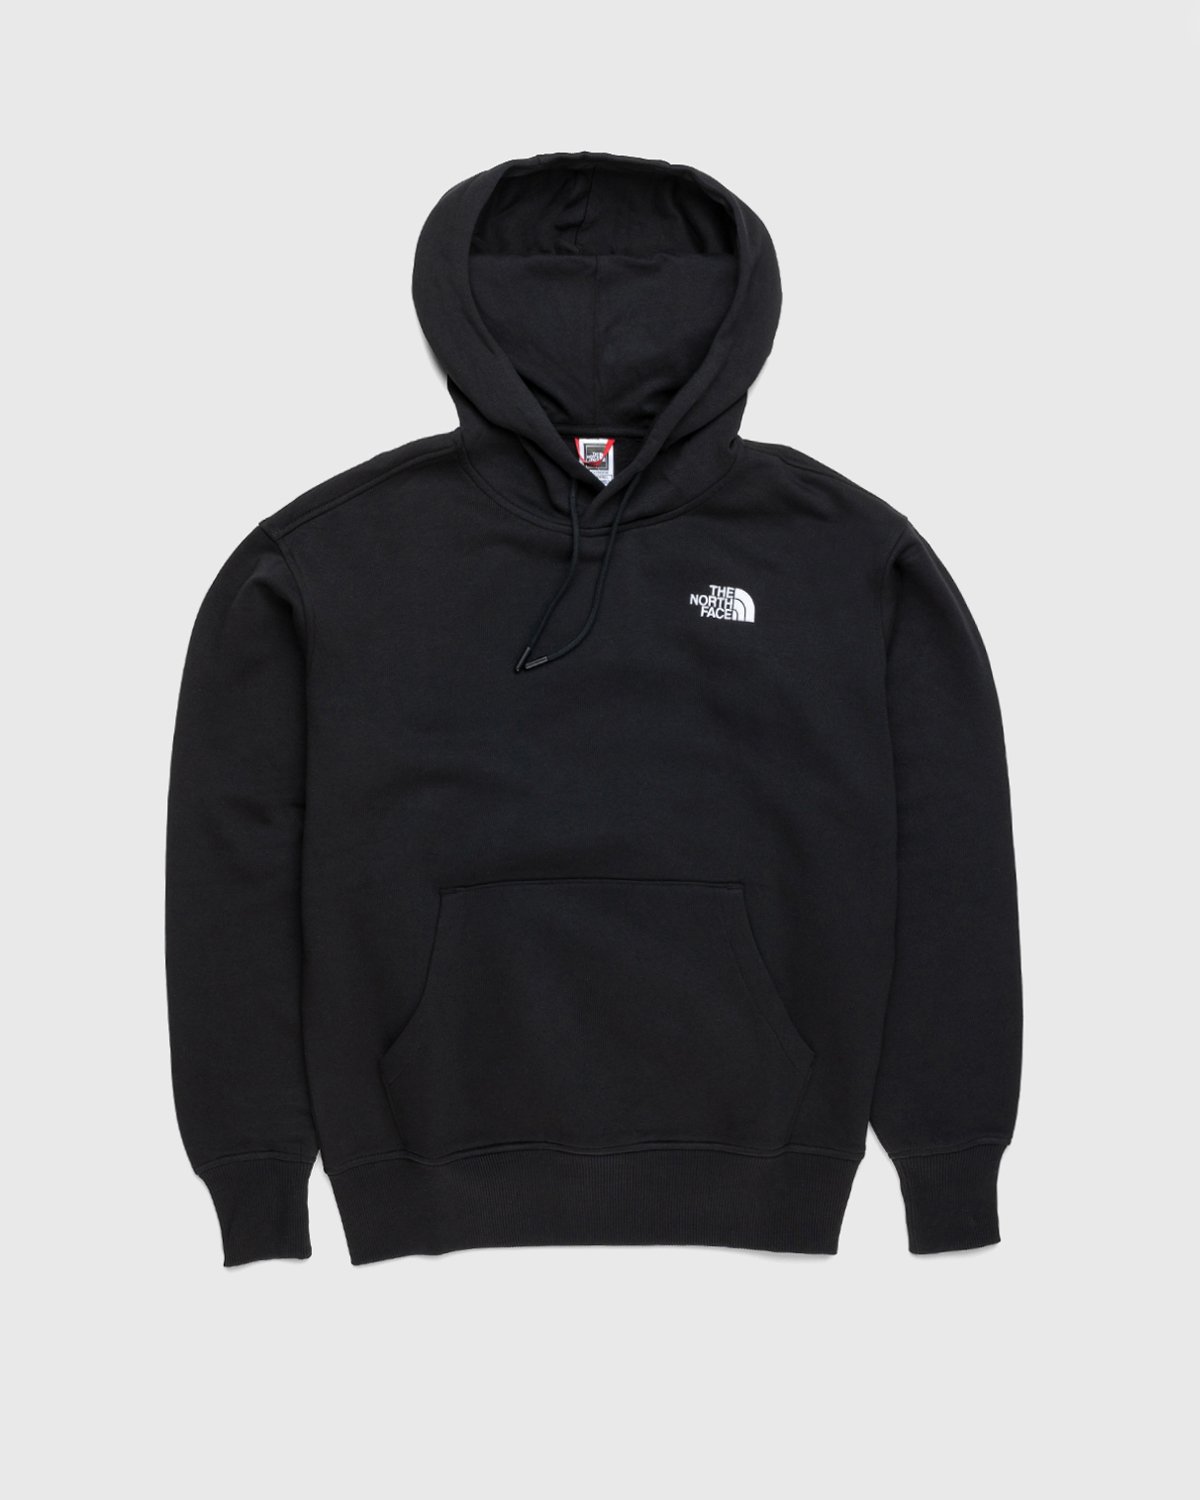 The North Face - Oversized Essential Hoodie Black - Clothing - Black - Image 1